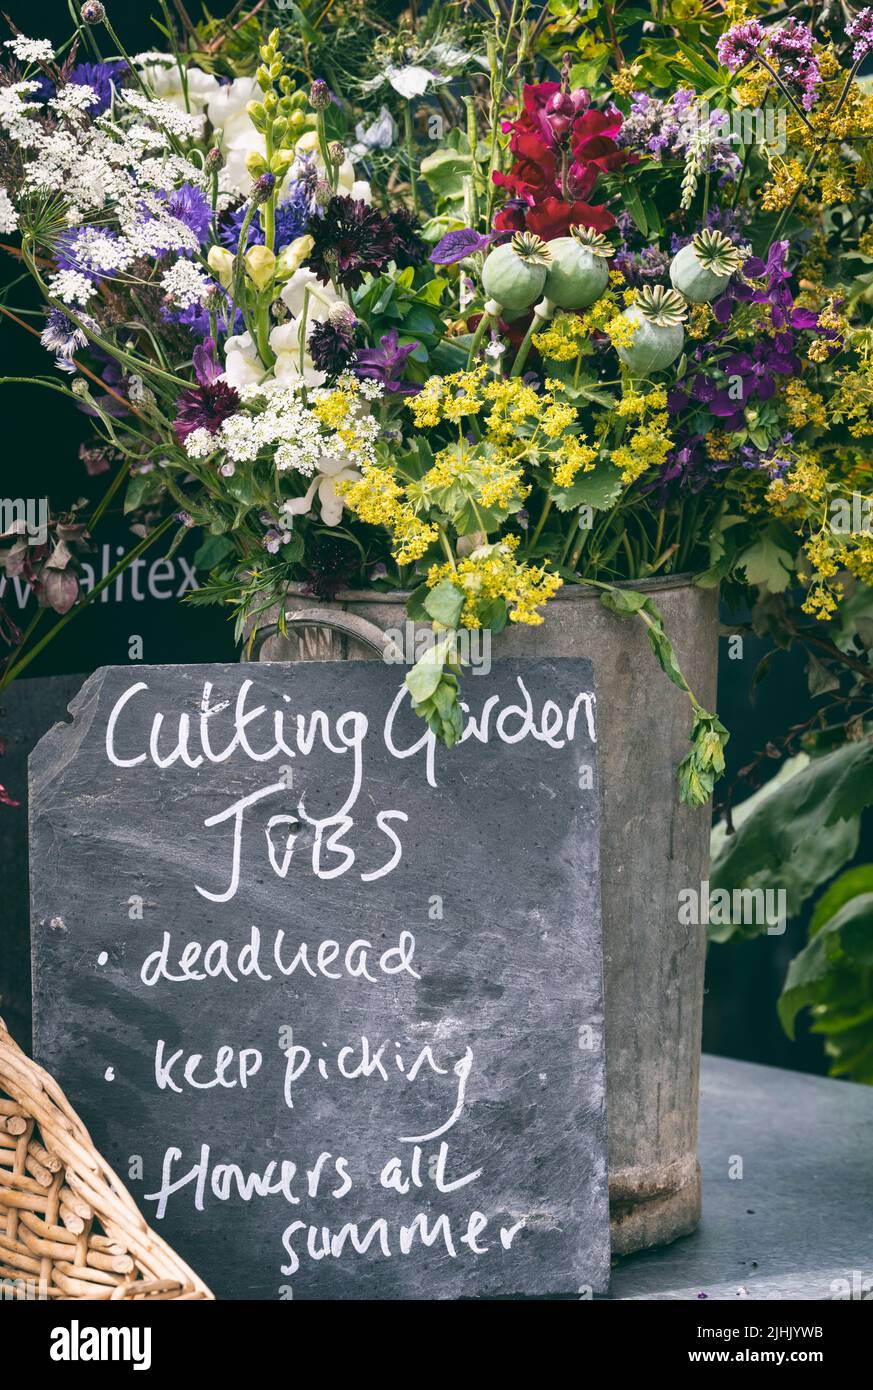 Cut flower display with chalkboard jobs list at a flower show. UK. Vintage filter applied Stock Photo